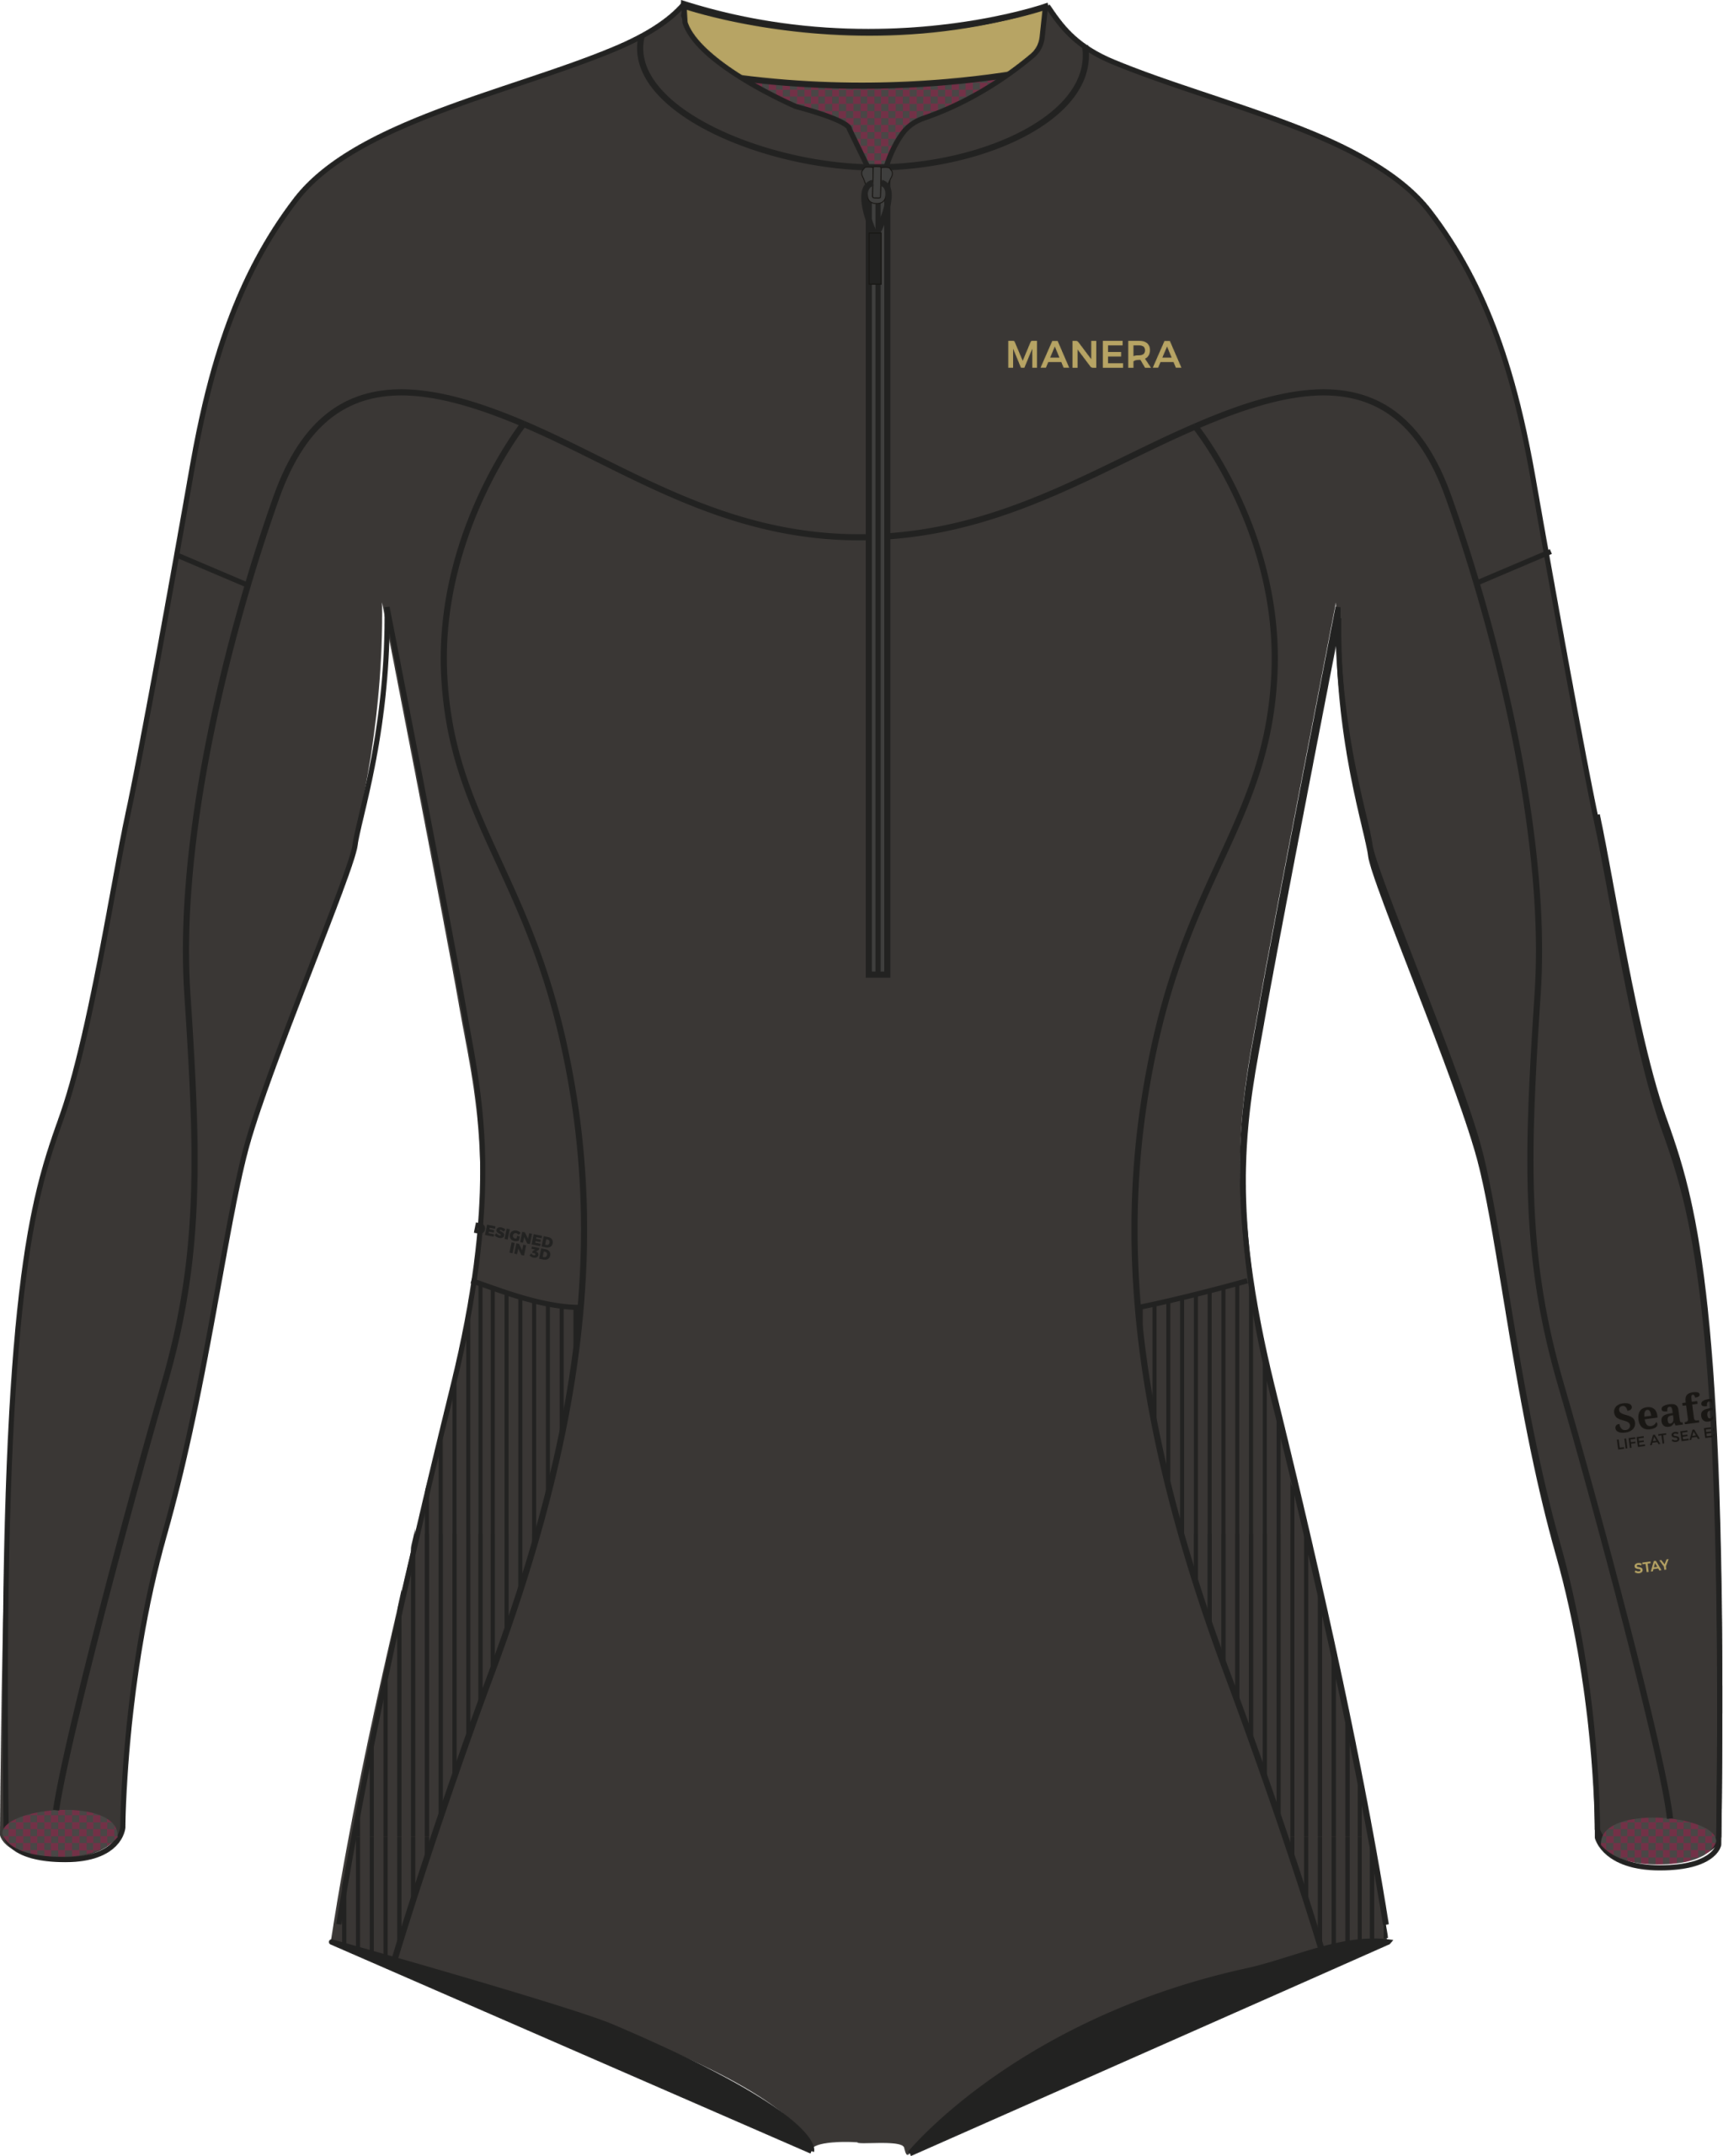 Manera S/S 22 Wetsuits Preview